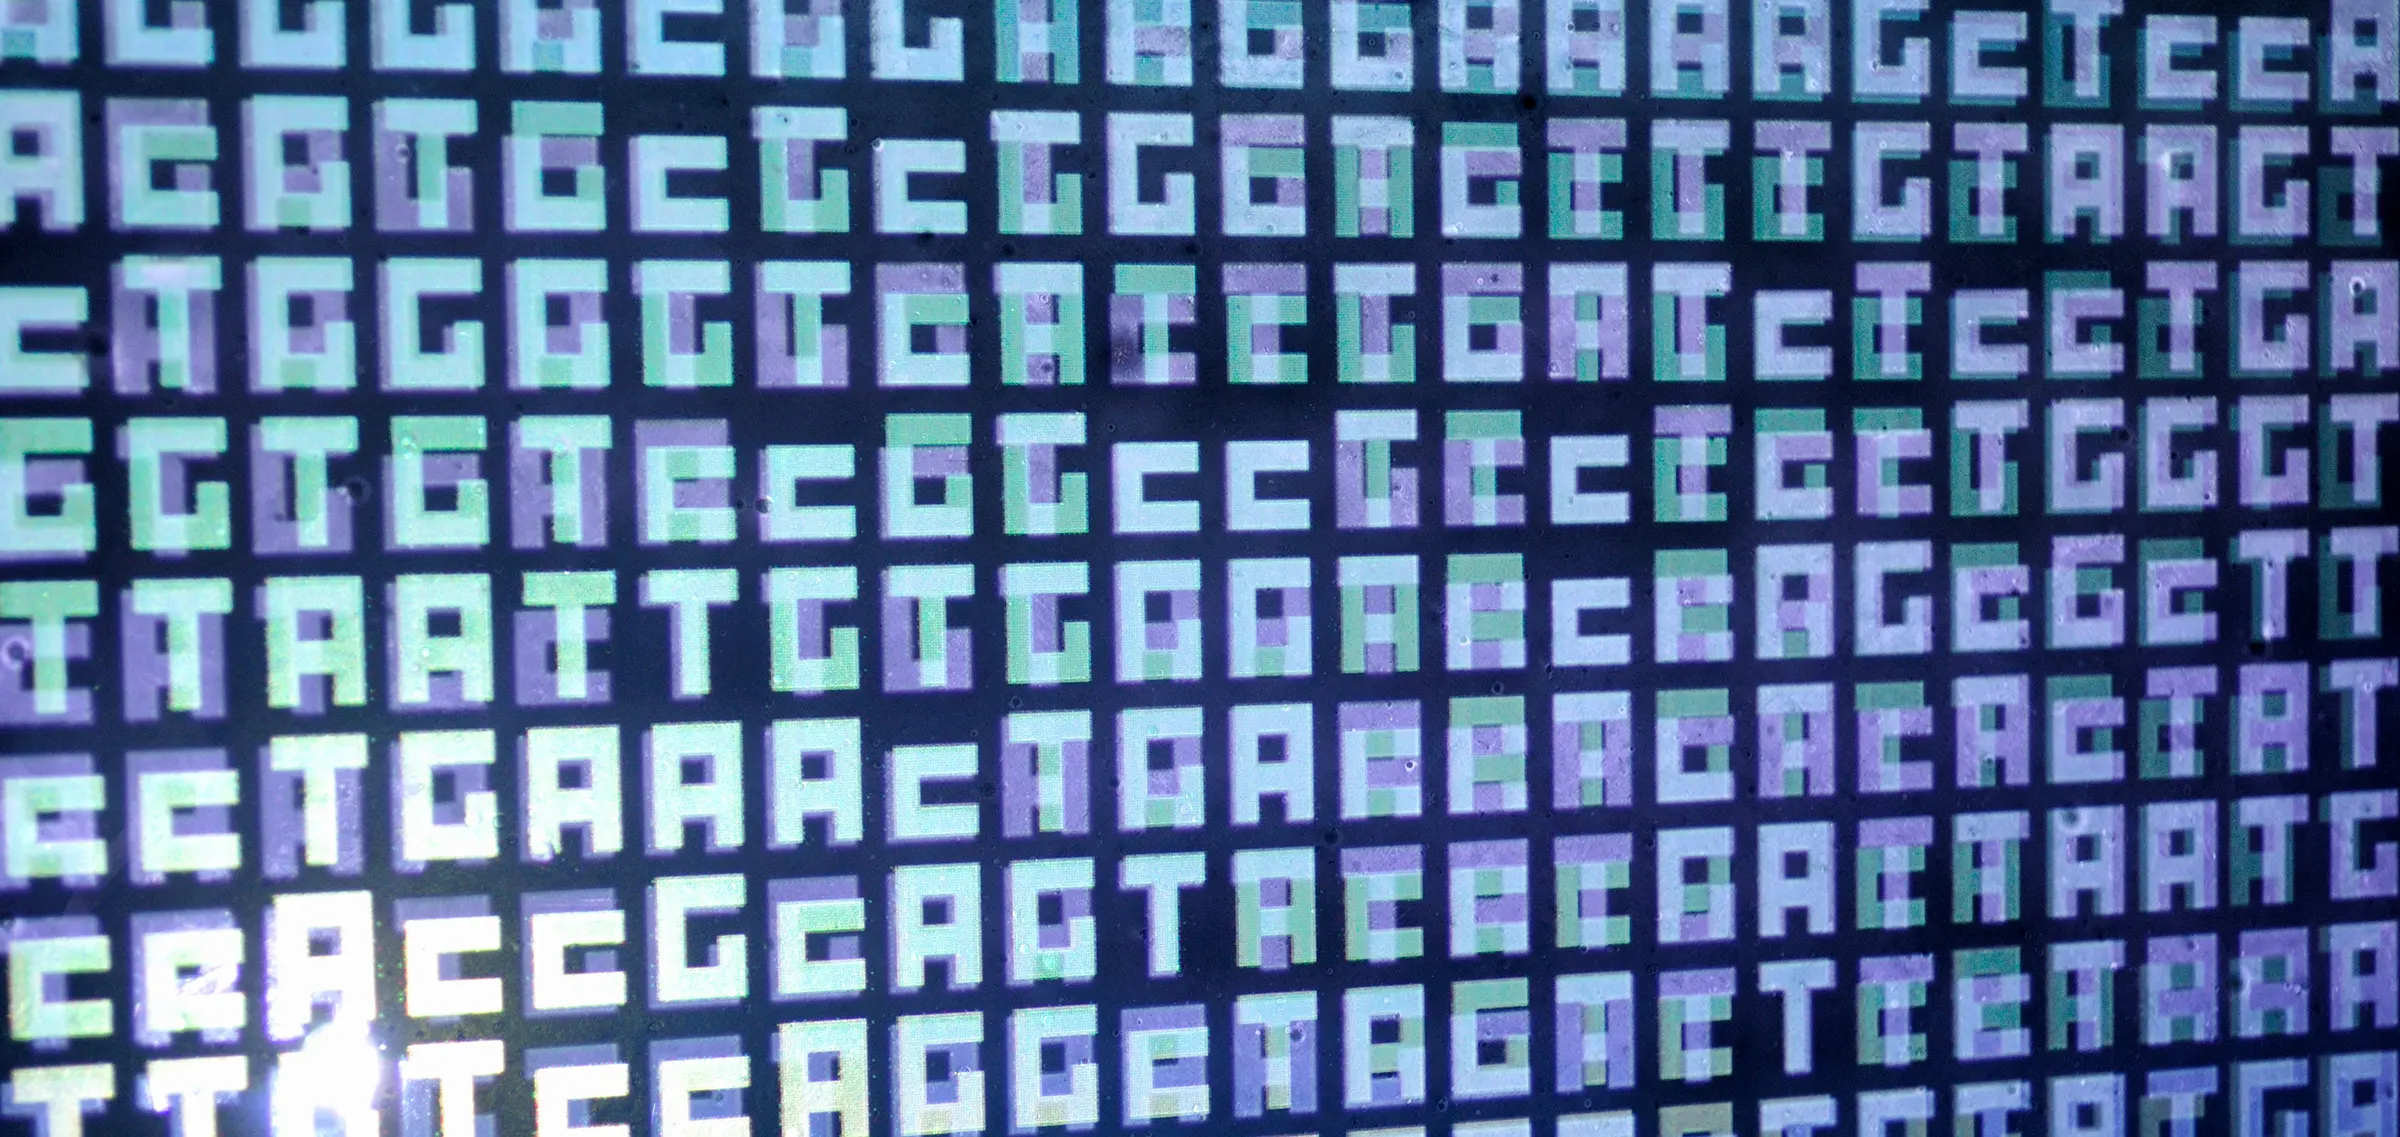 Single letters on a screen C, T, G, A, projected on top of each other (two sides)